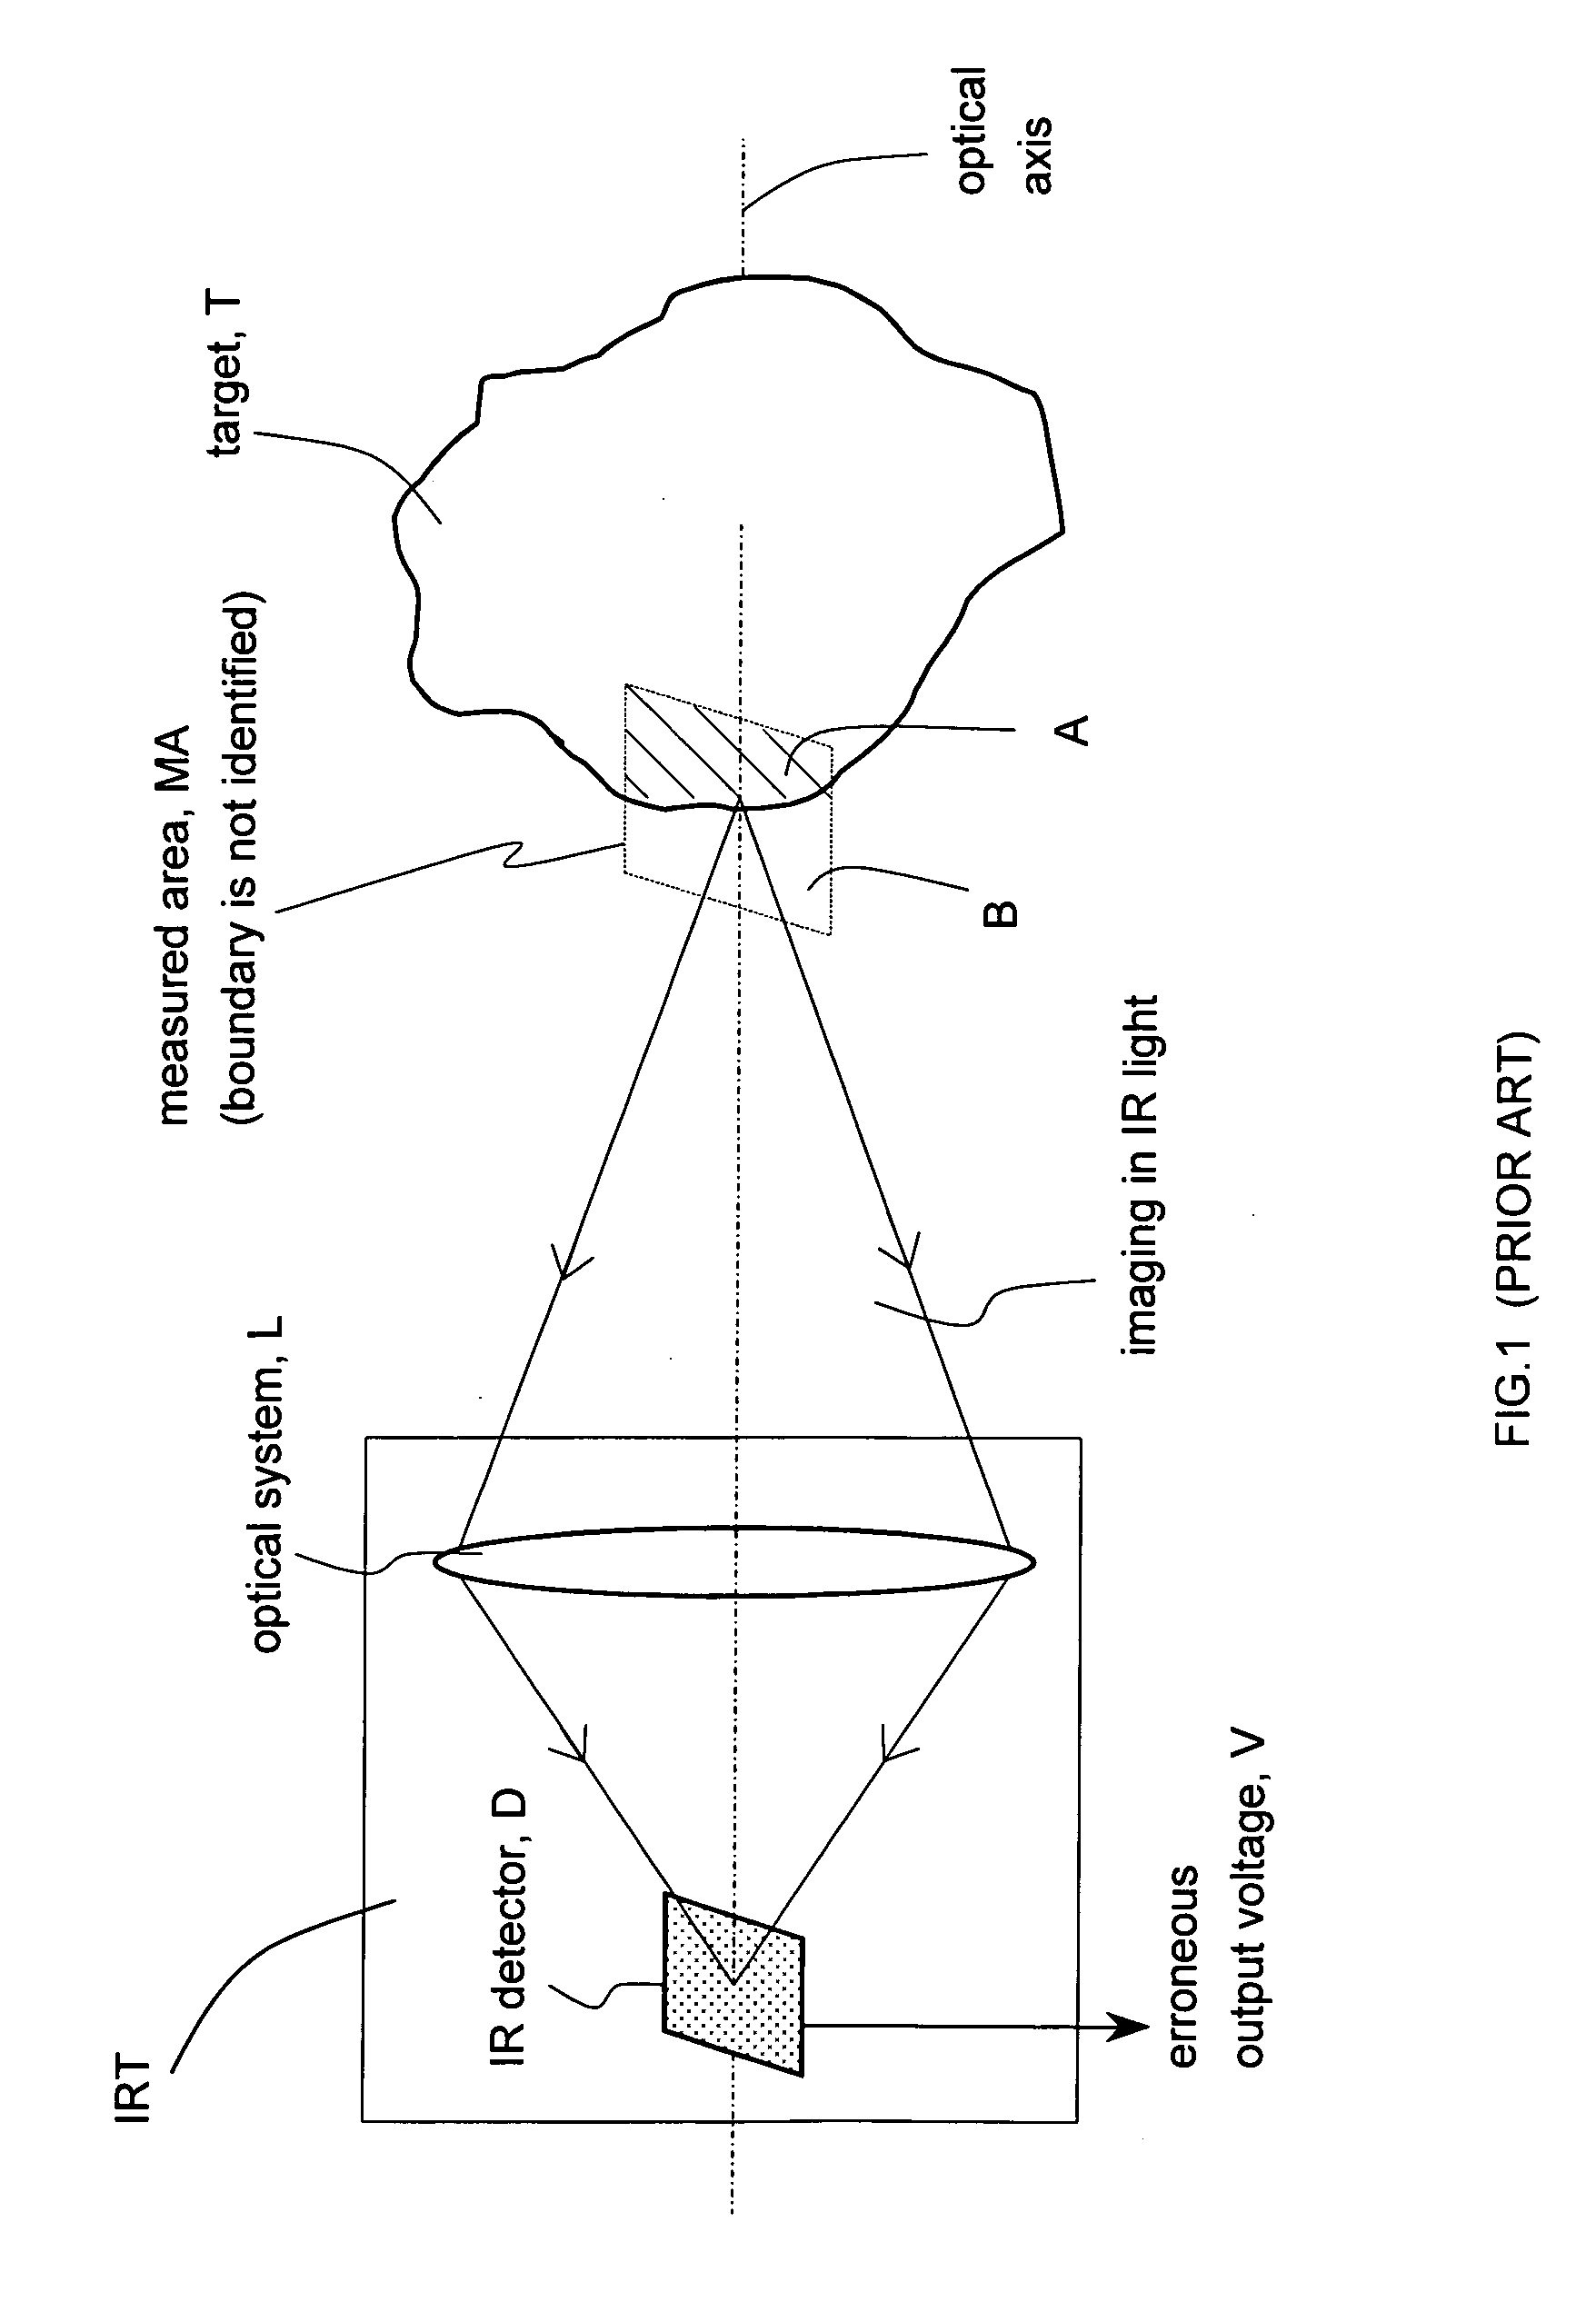 Infrared thermometer with through-the-lens visible targeting system